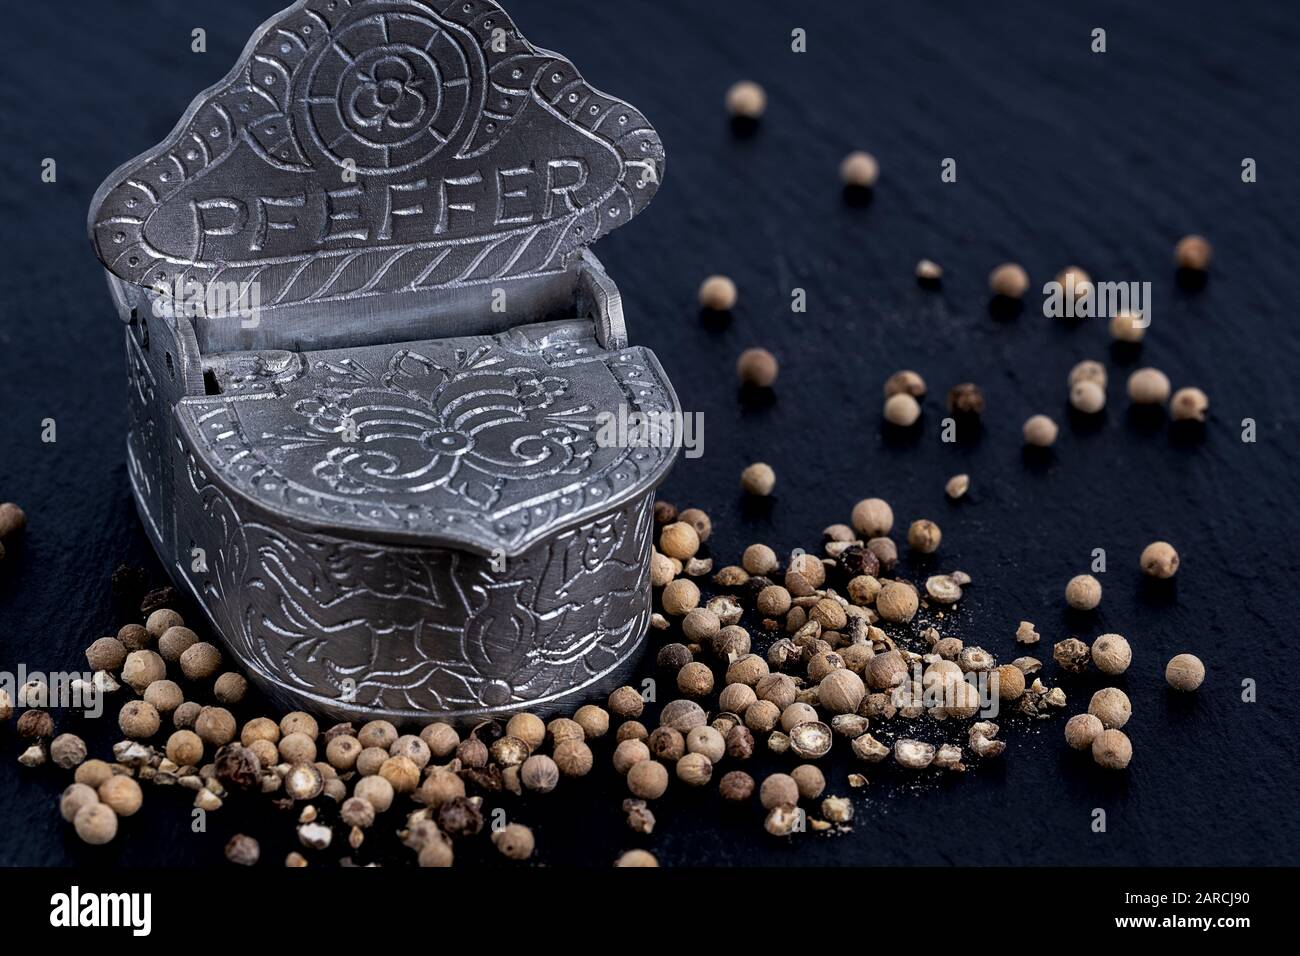 Whole and crushed peppercorns lying around a pewter storage jar on a slate plate Stock Photo